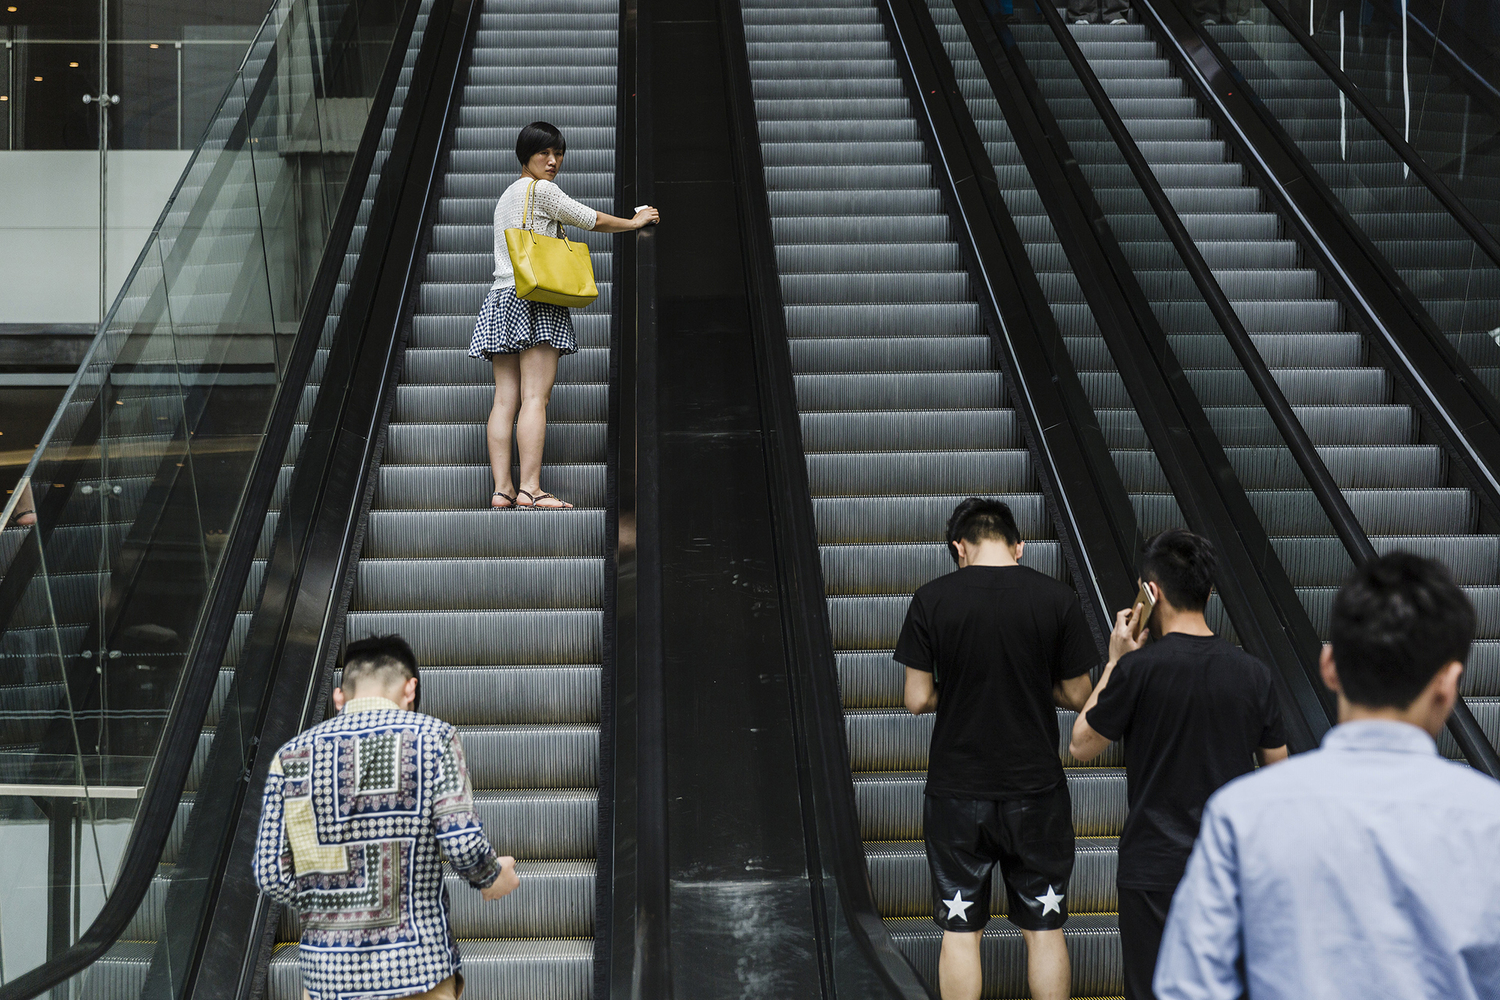 A woman glances at Puamap’s students on an escalator in a shopping mall, May 15, 2015. 